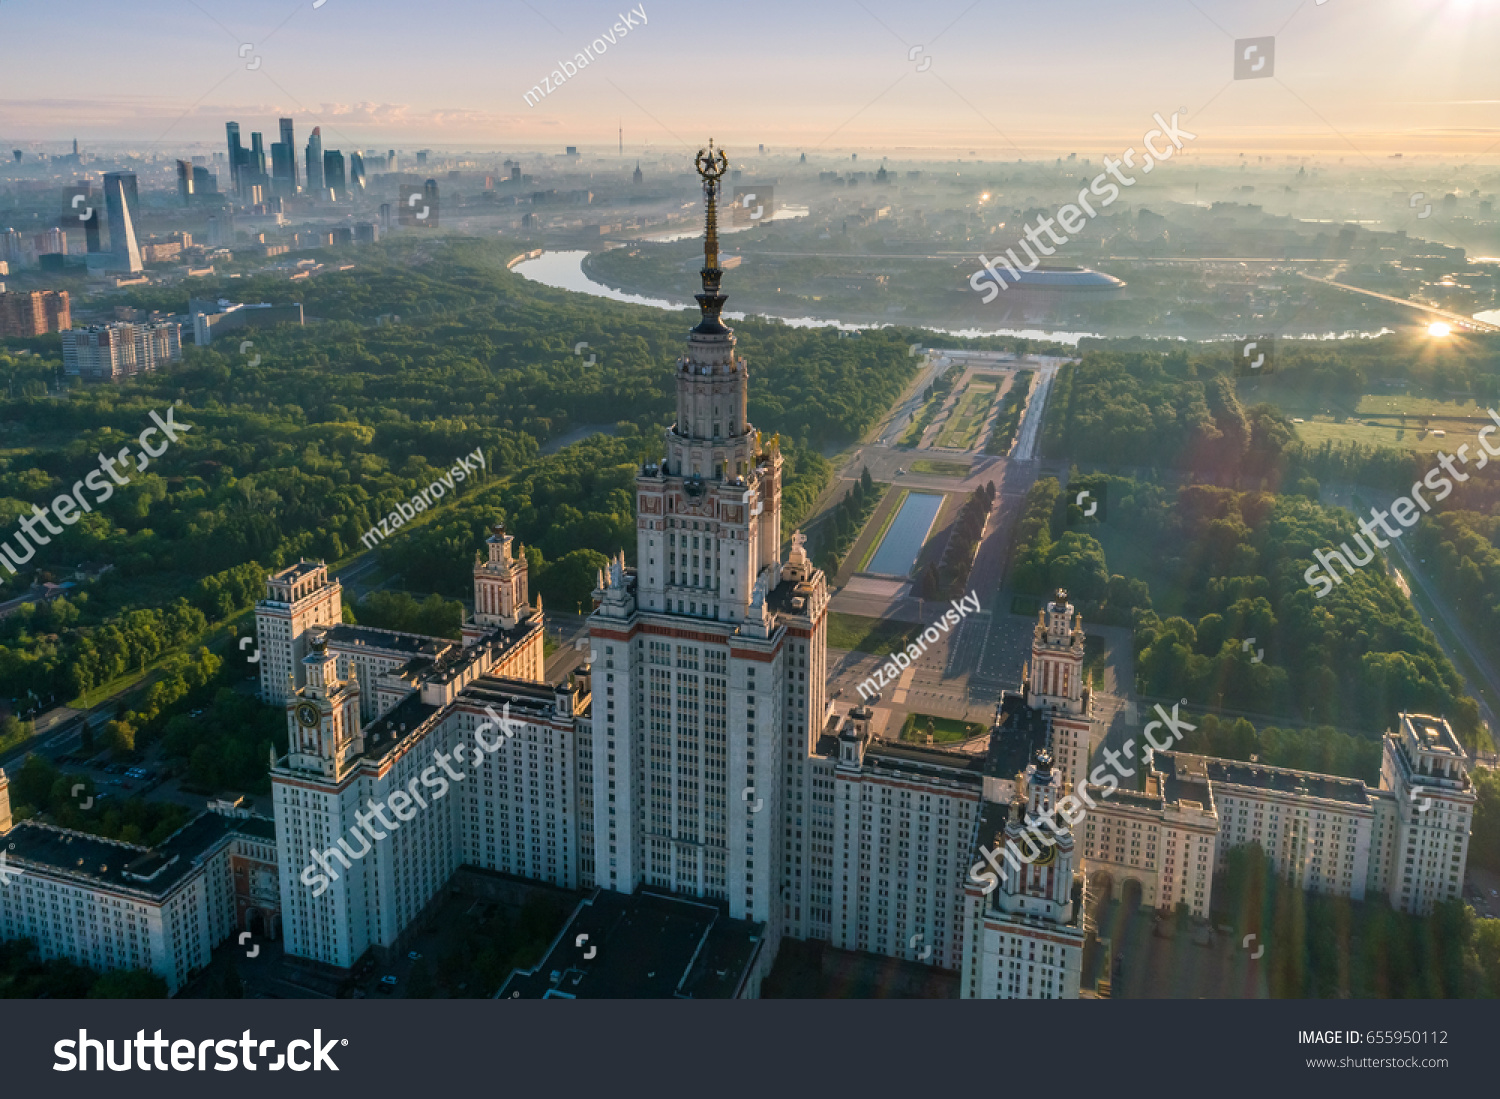 Moscow state university and Moscow city business center at sunrise. City in fog. Russia. Aerial View. #655950112